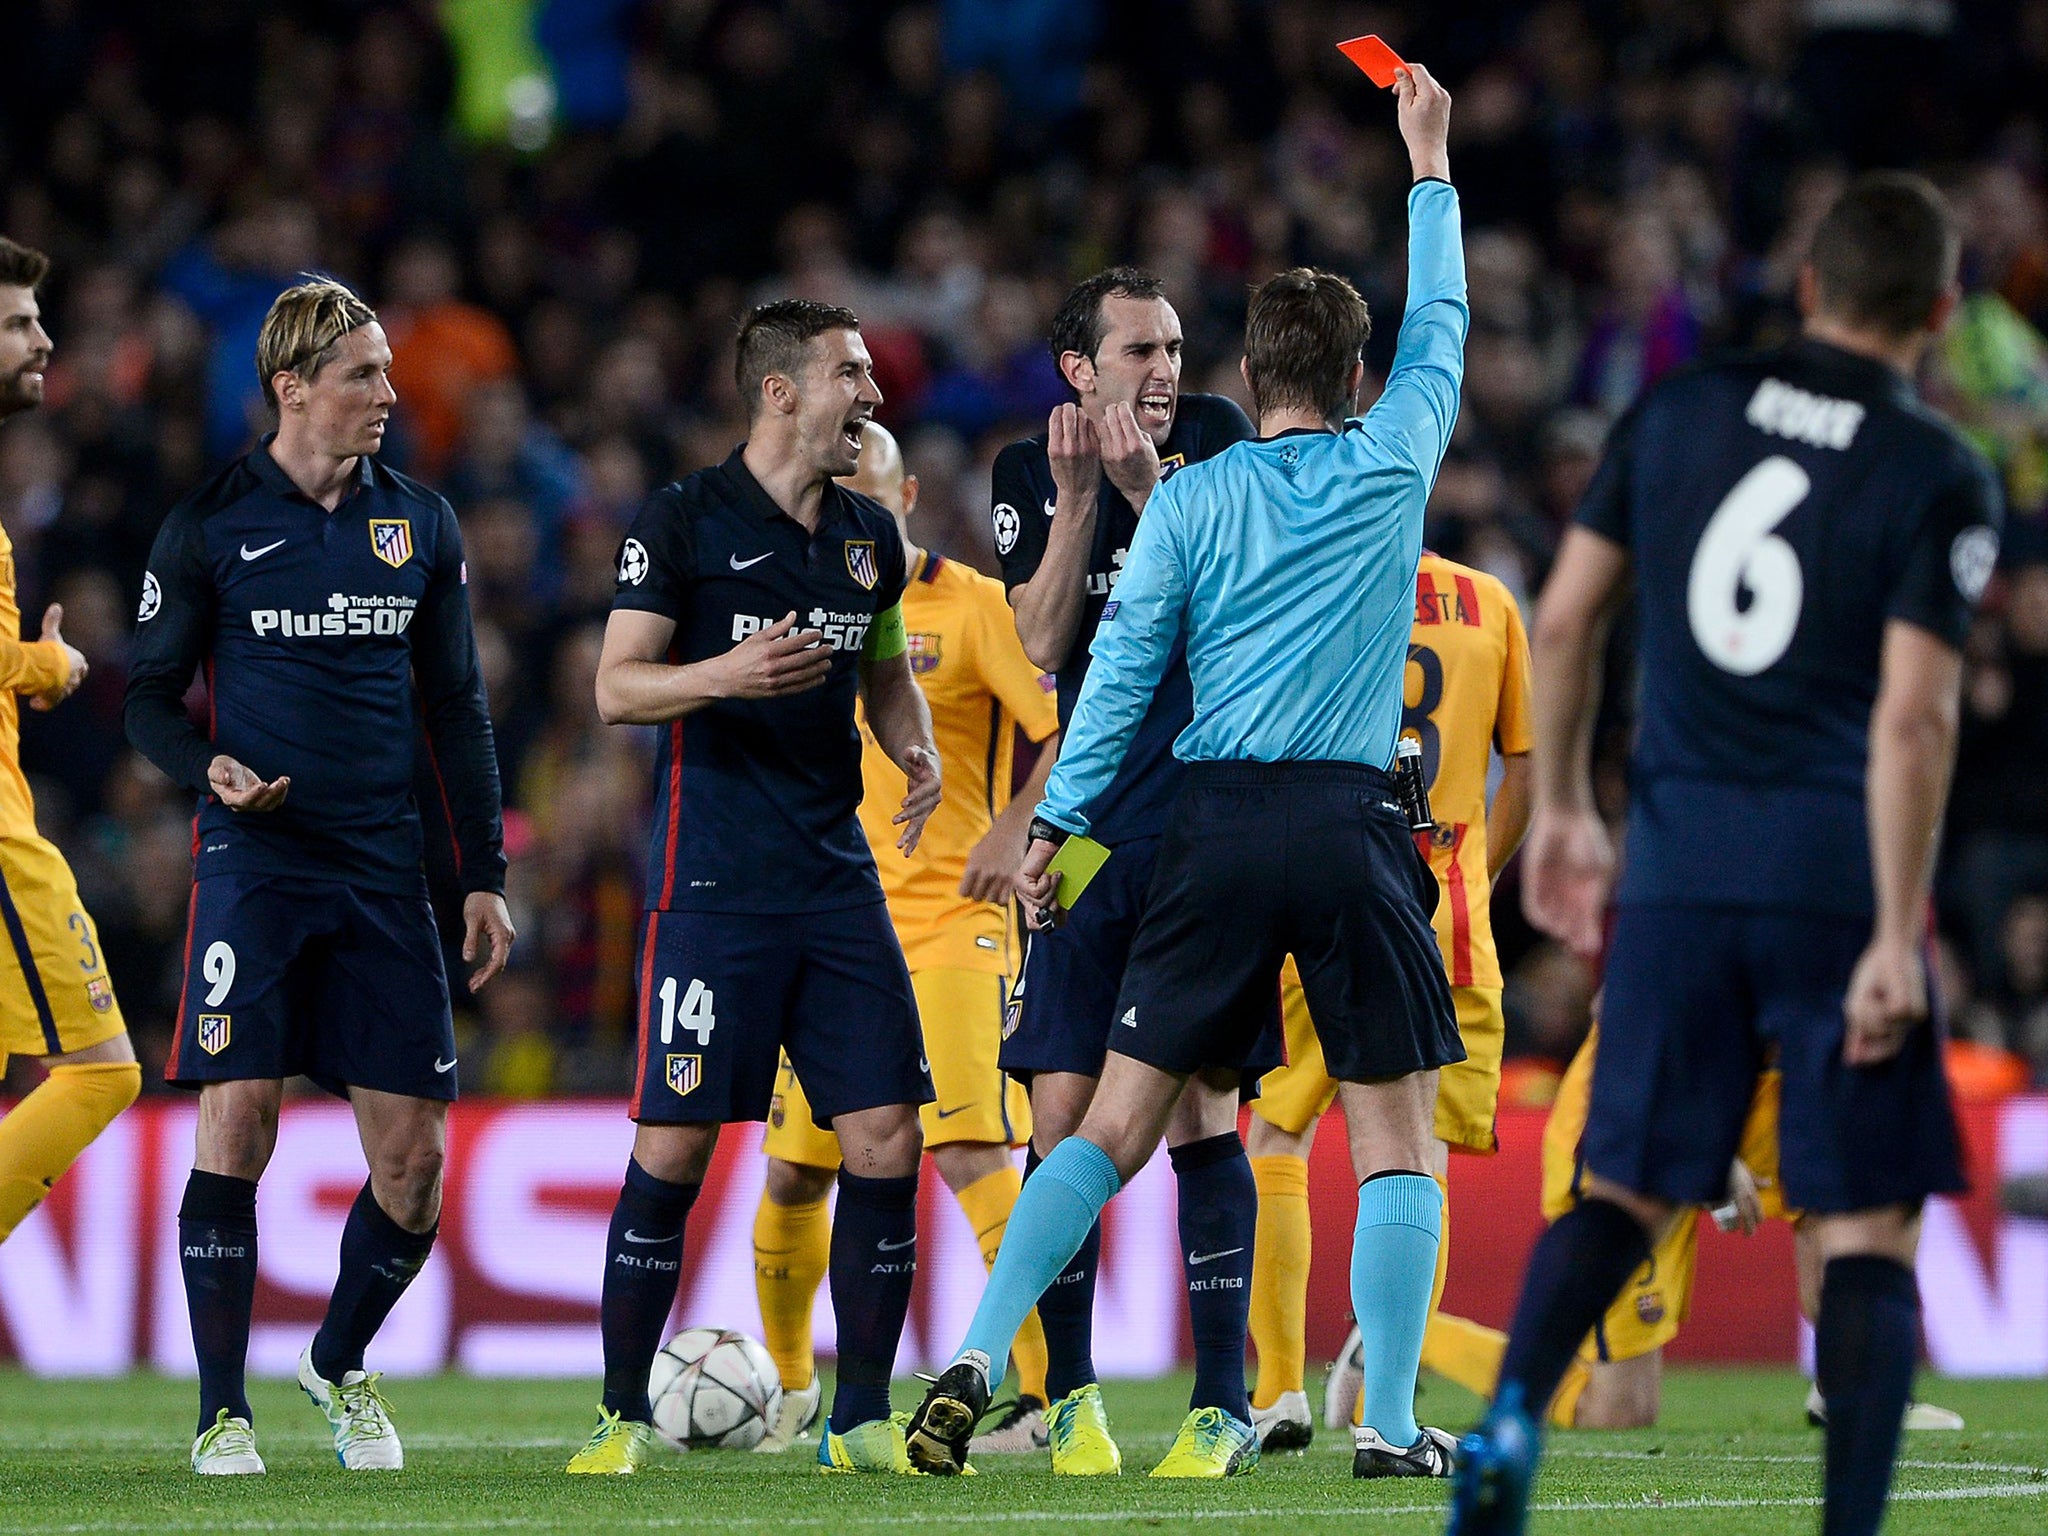 Fernando Torres (left) receives his second yellow card and is sent off